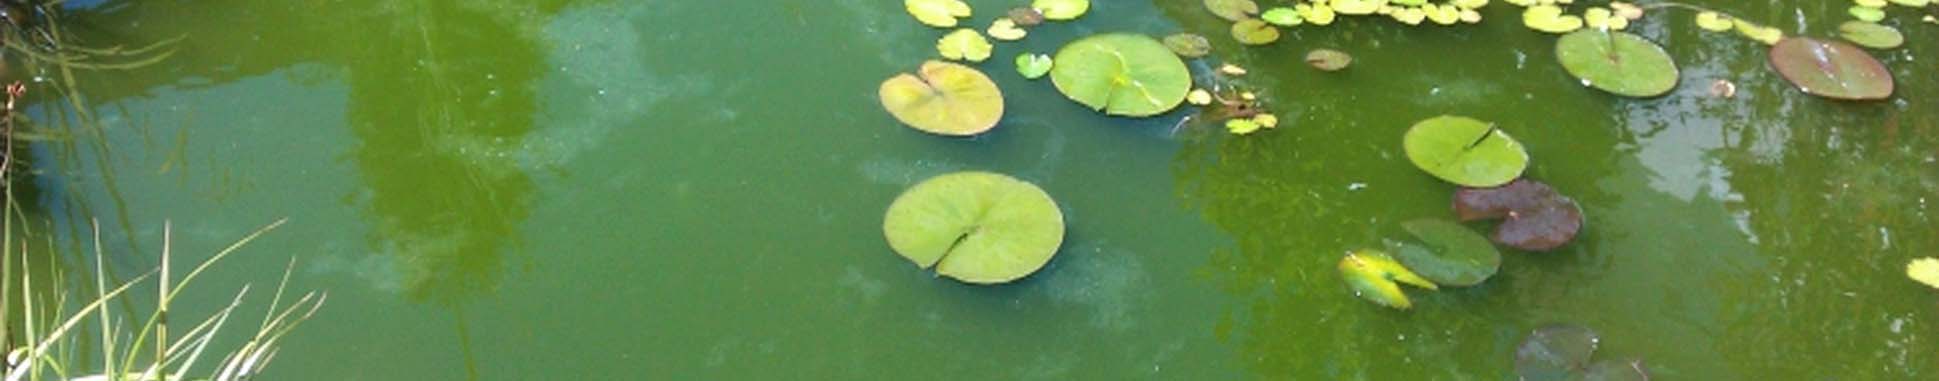 Green pond water